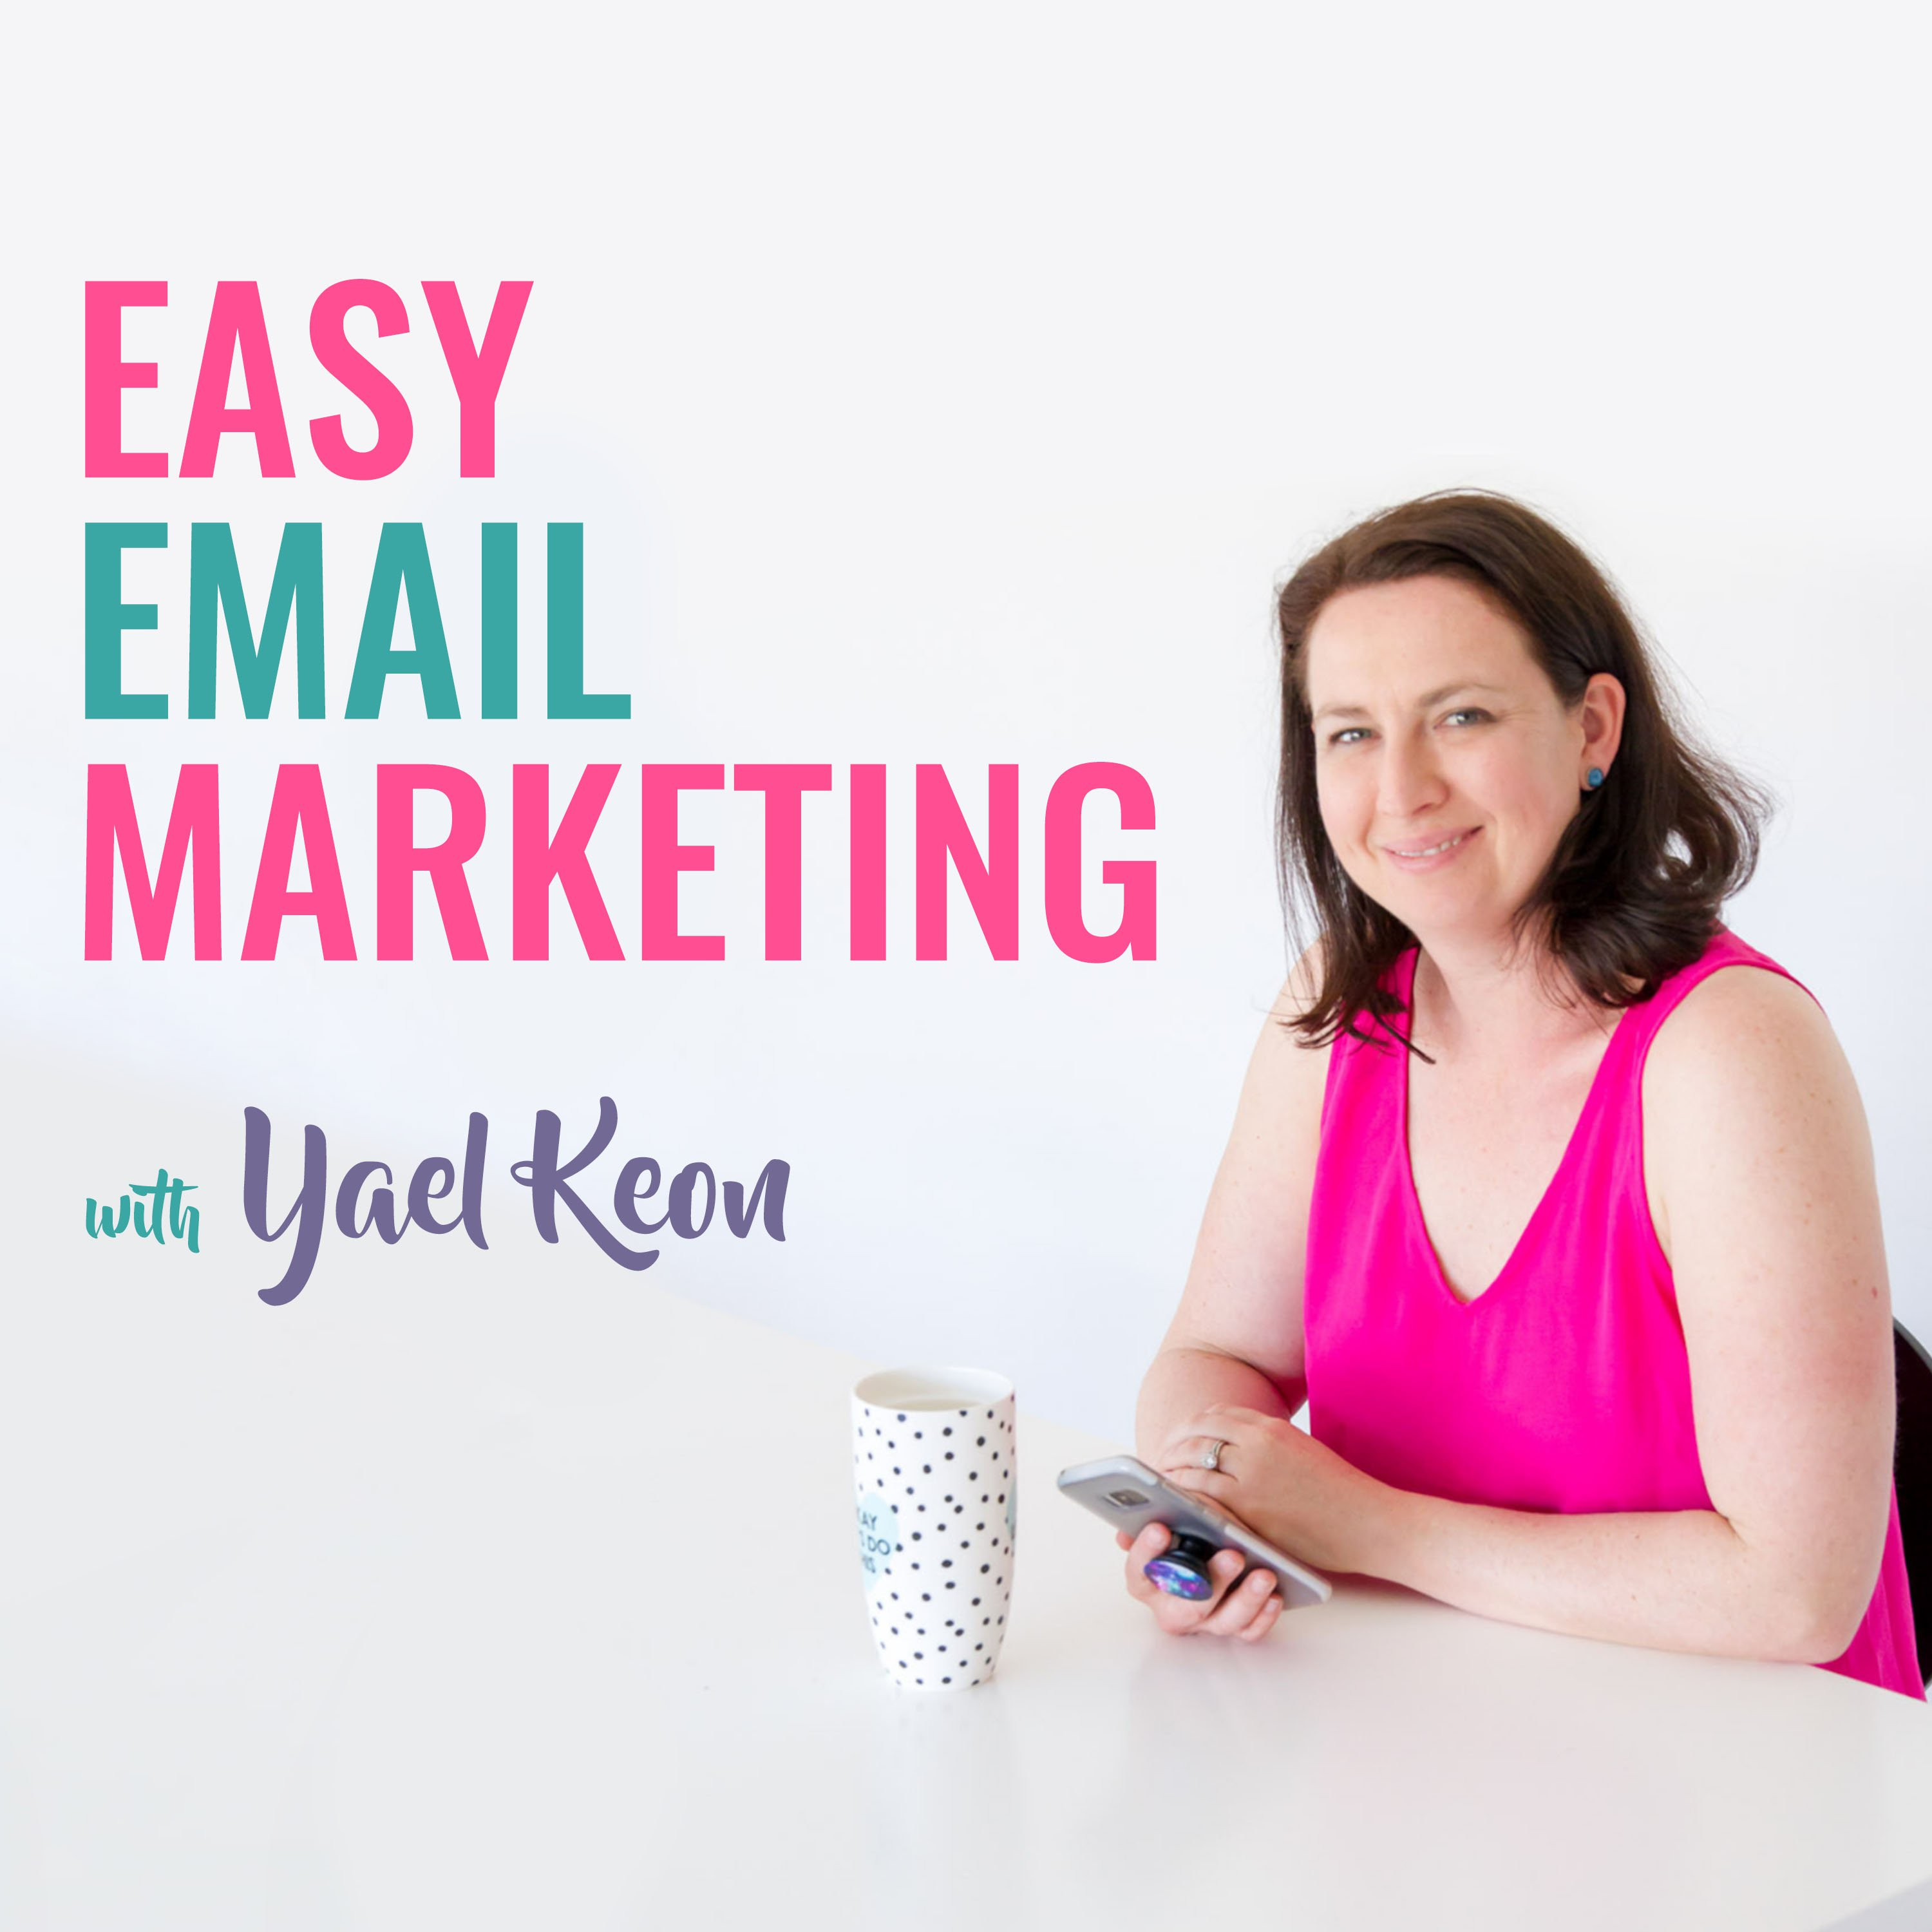 How email marketing fits into your marketing plan